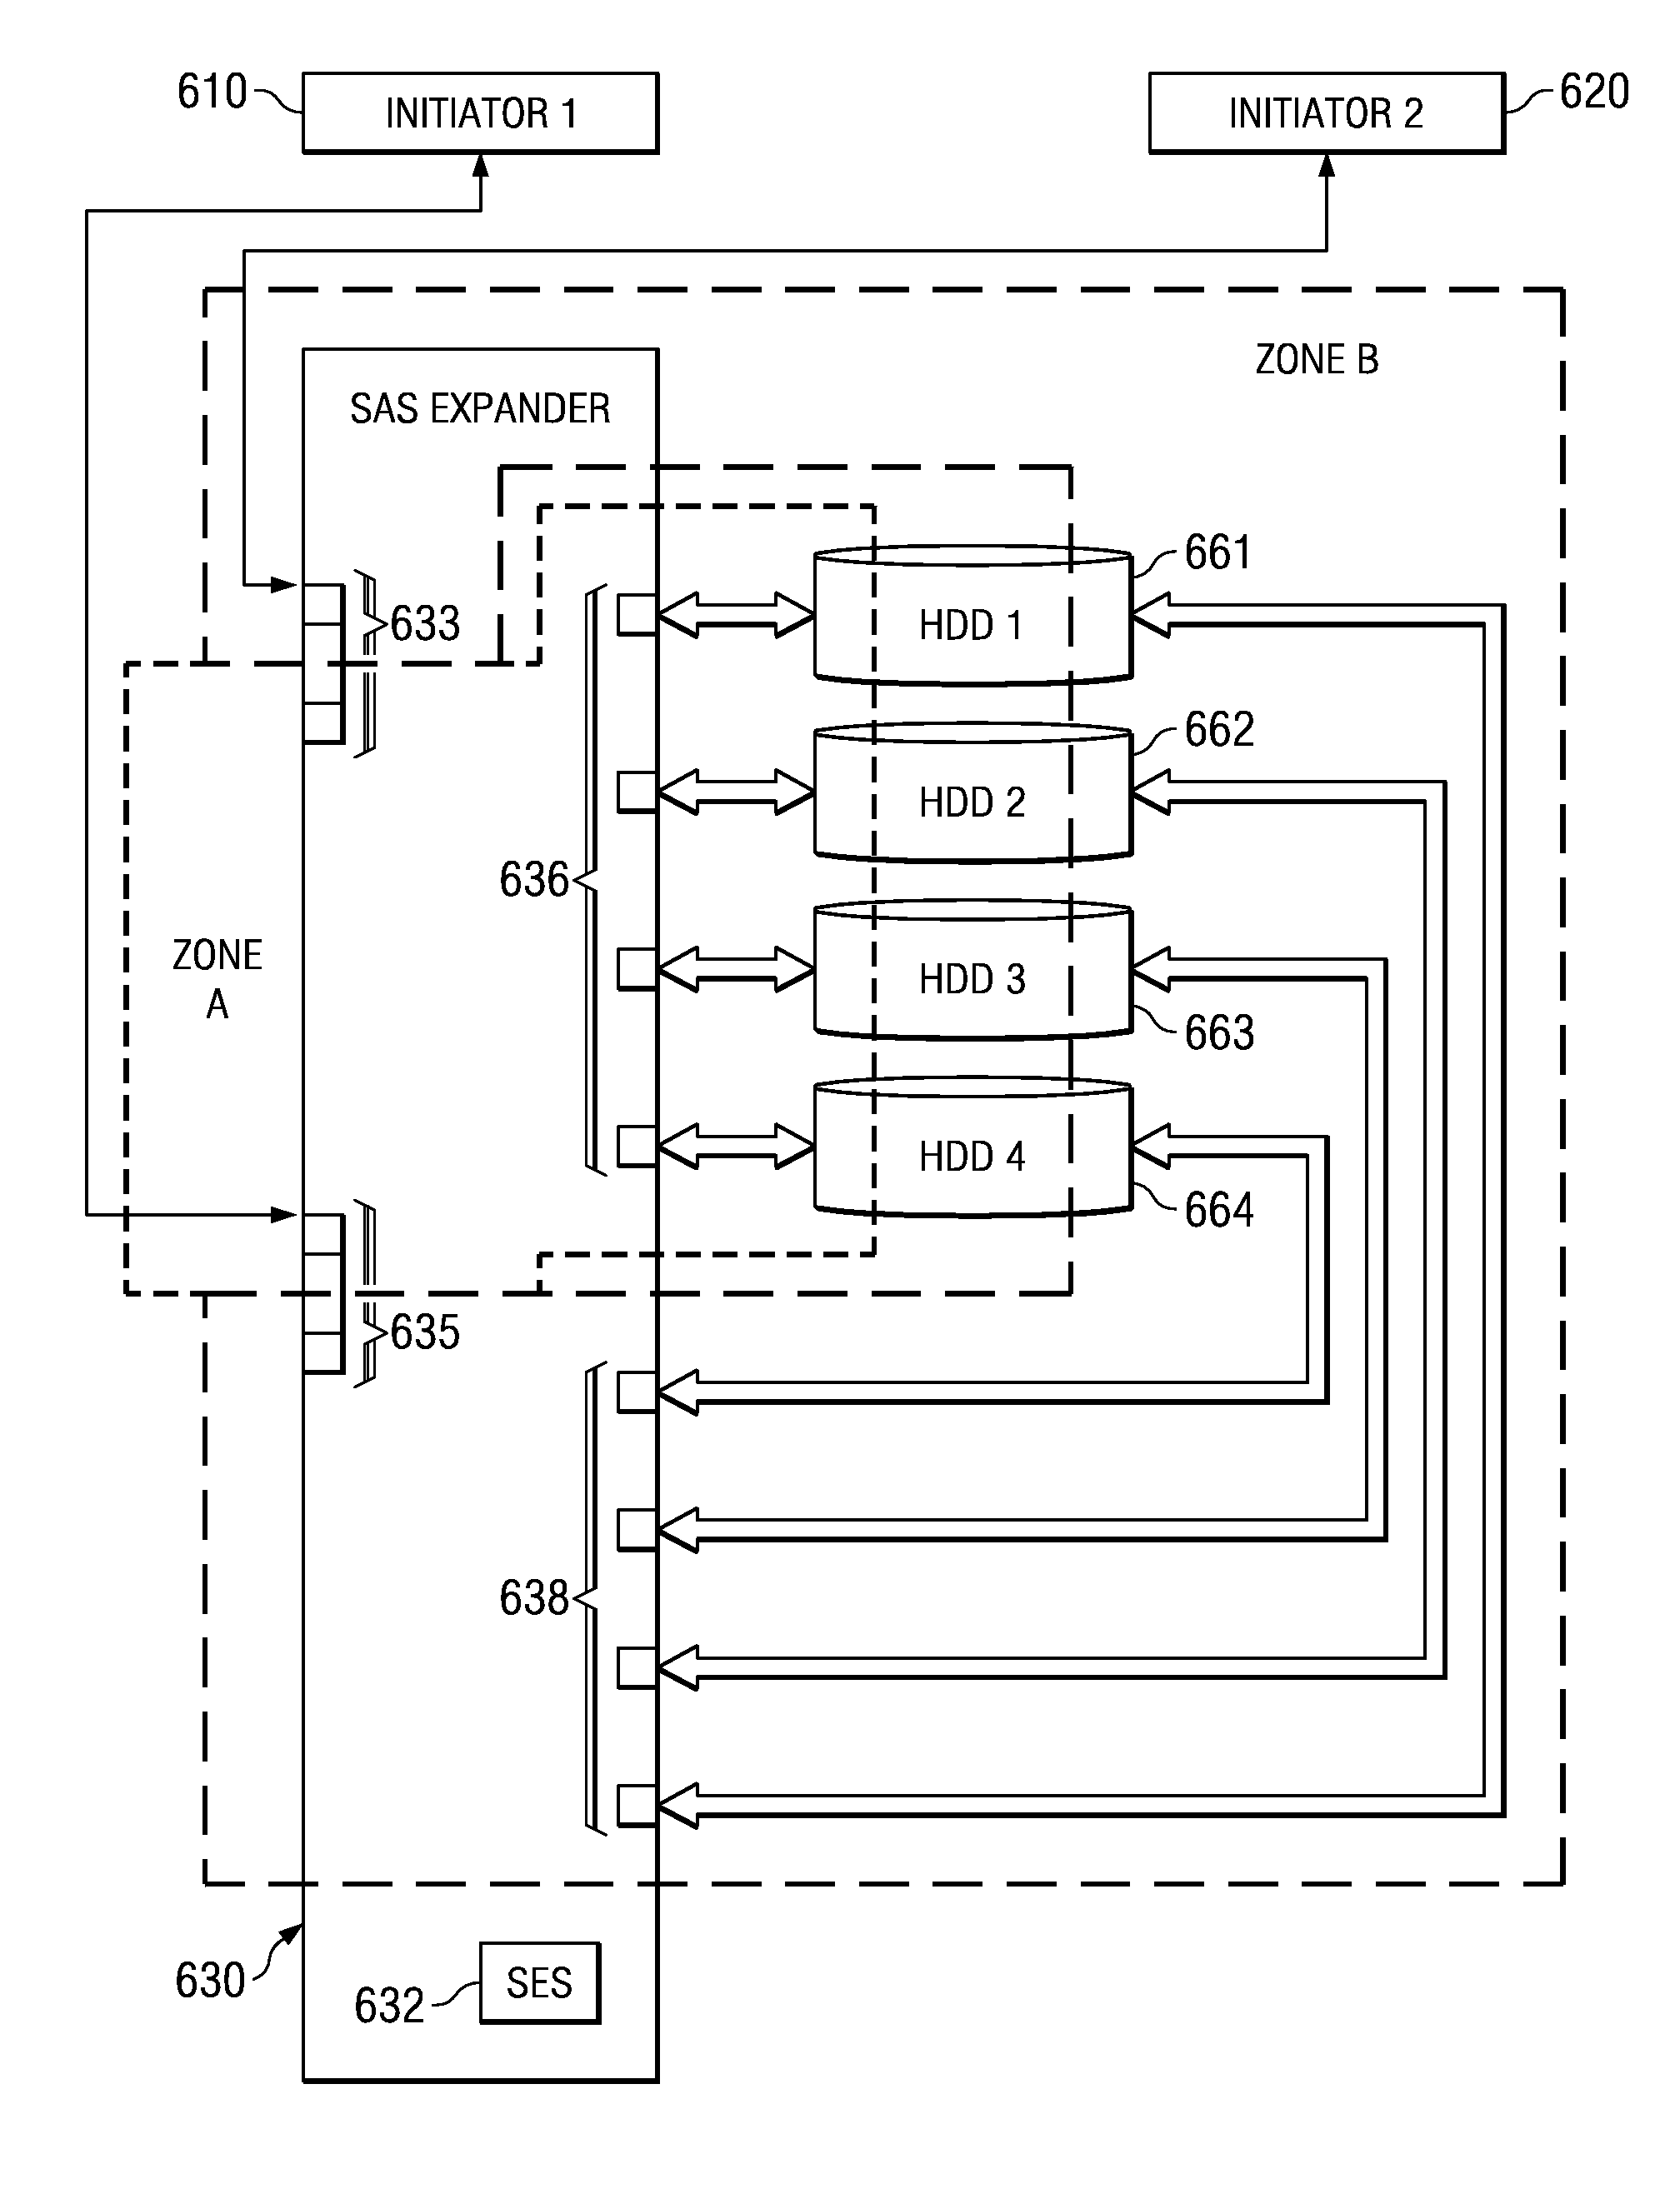 Intelligent dynamic multi-zone single expander connecting dual ported drives